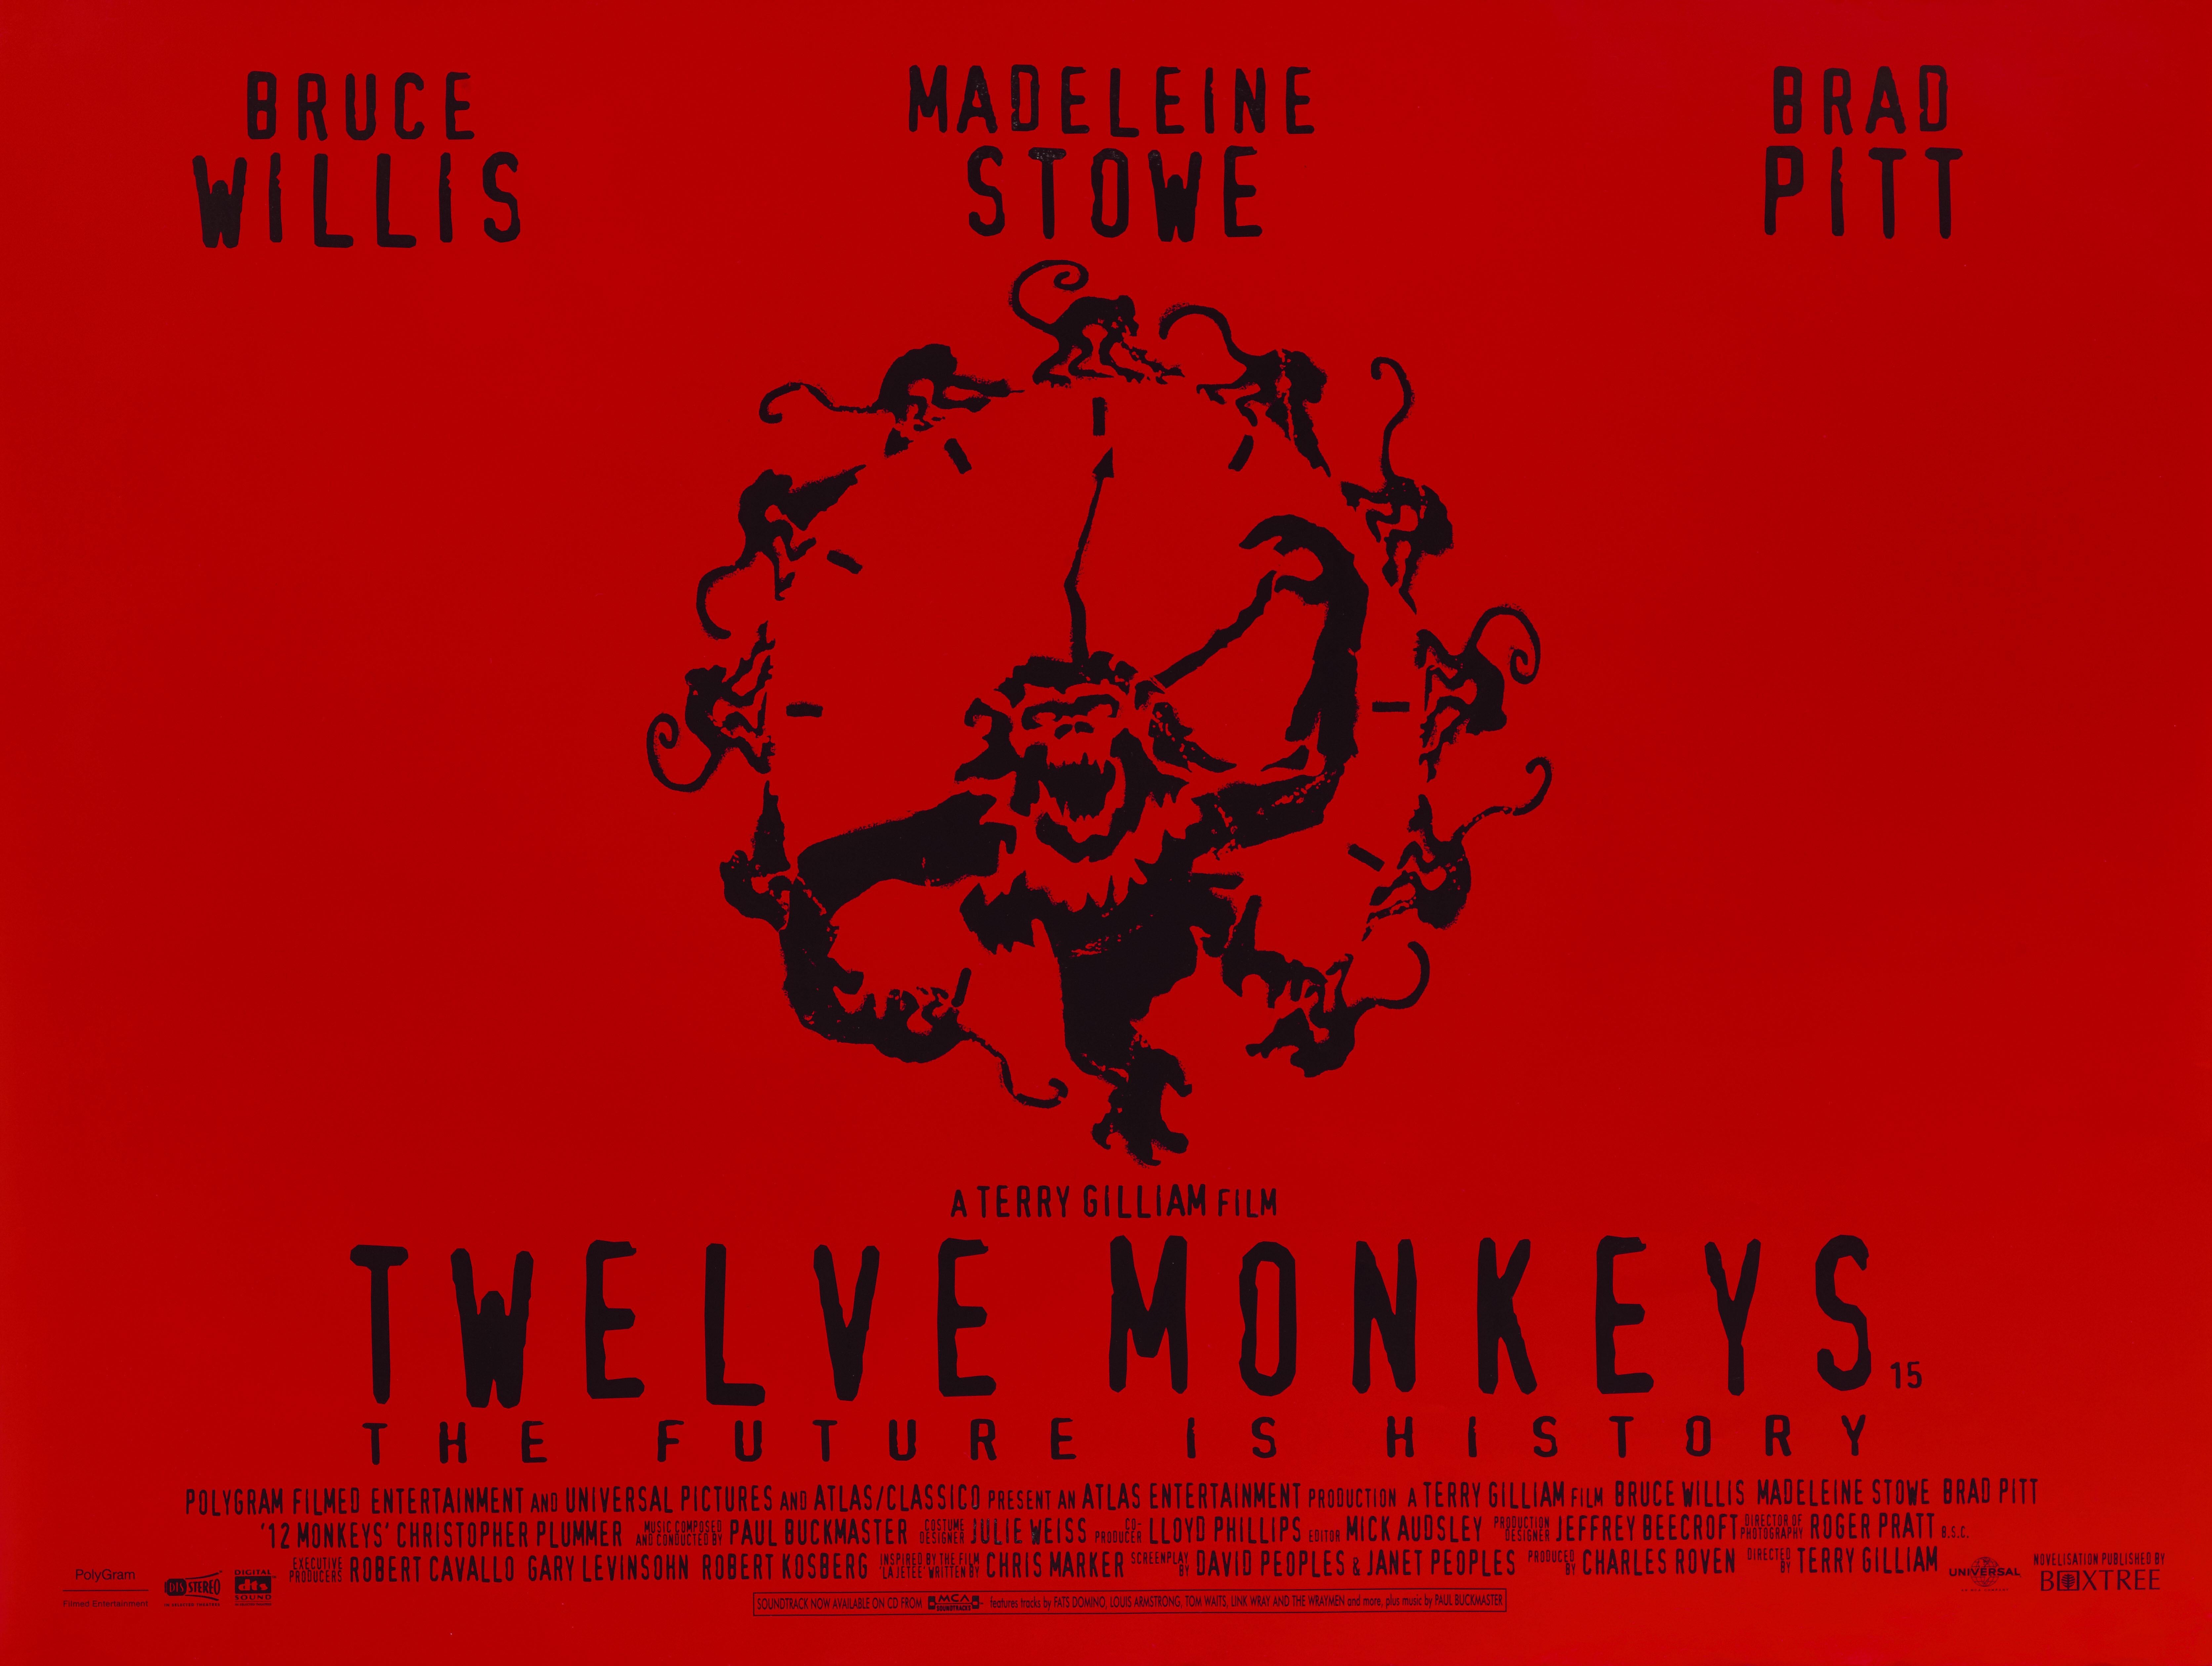 Original British film poster for Terry Gilliam's 1995 science fiction thriller 12 Monkeys. The film is starring Bruce Willis. This poster was designed for UK cinemas in 1995 when the film was firs shown. The poser is the advance poster and in near